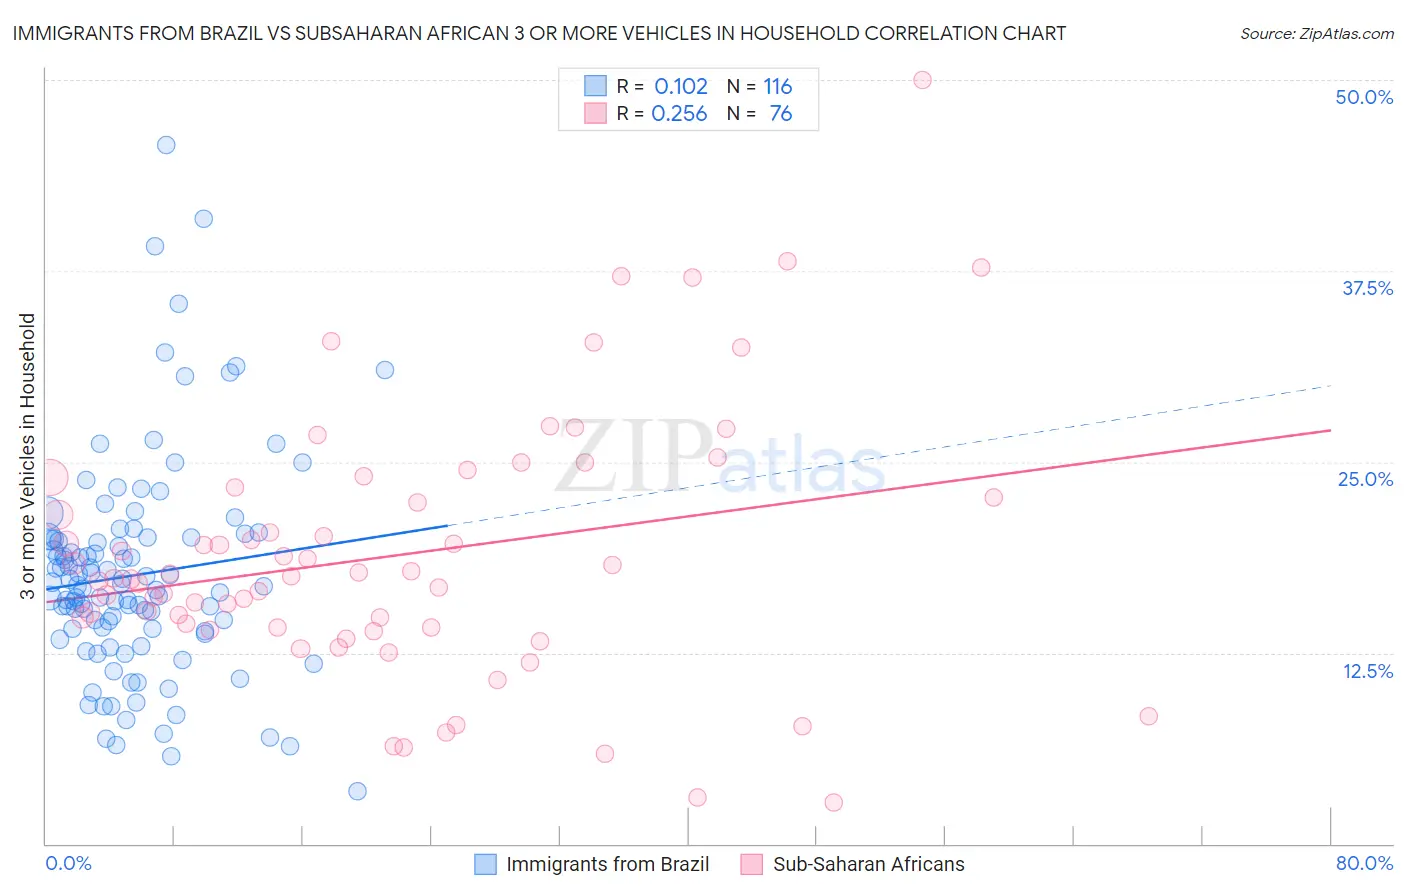 Immigrants from Brazil vs Subsaharan African 3 or more Vehicles in Household